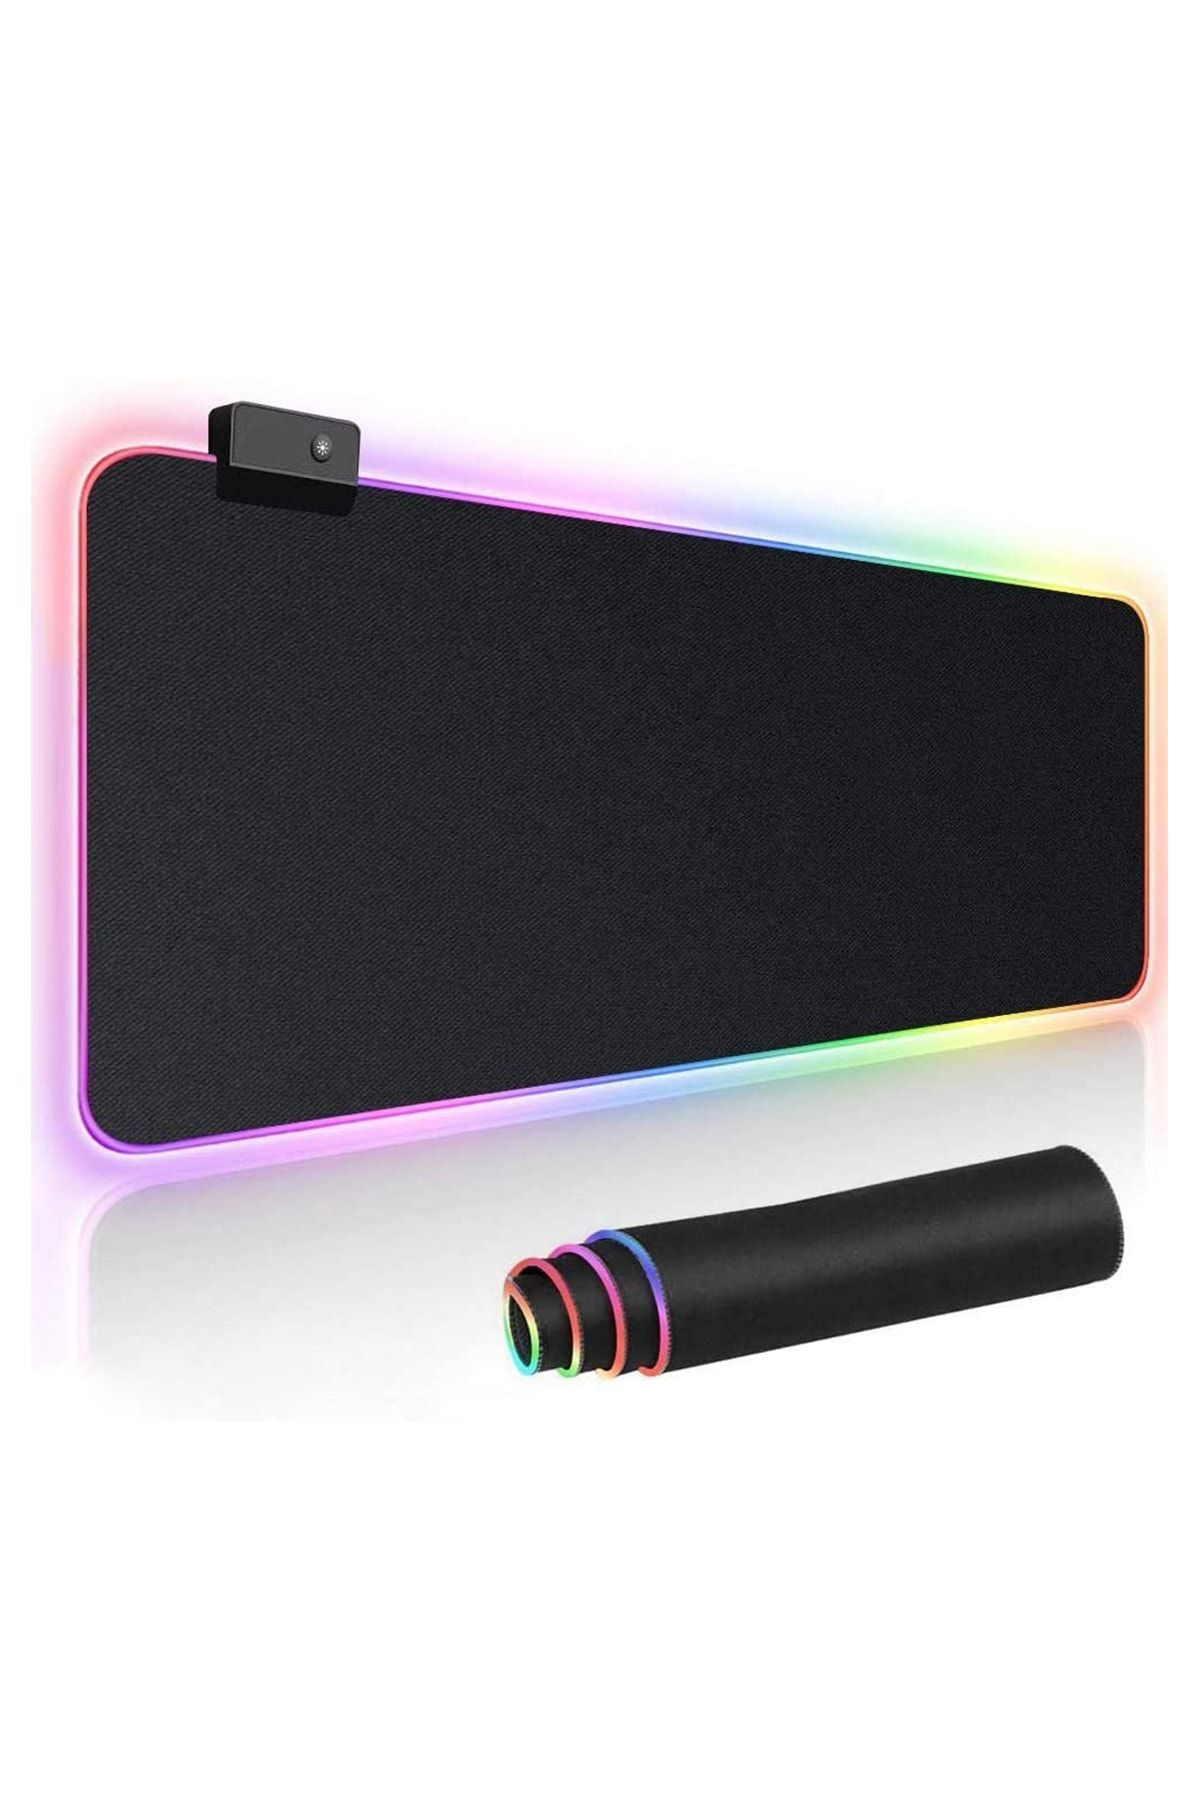 bause Gms-wt-5 Rgb Gaming Mouse Pad Oyuncu Mouse Pad - 90x40 cm